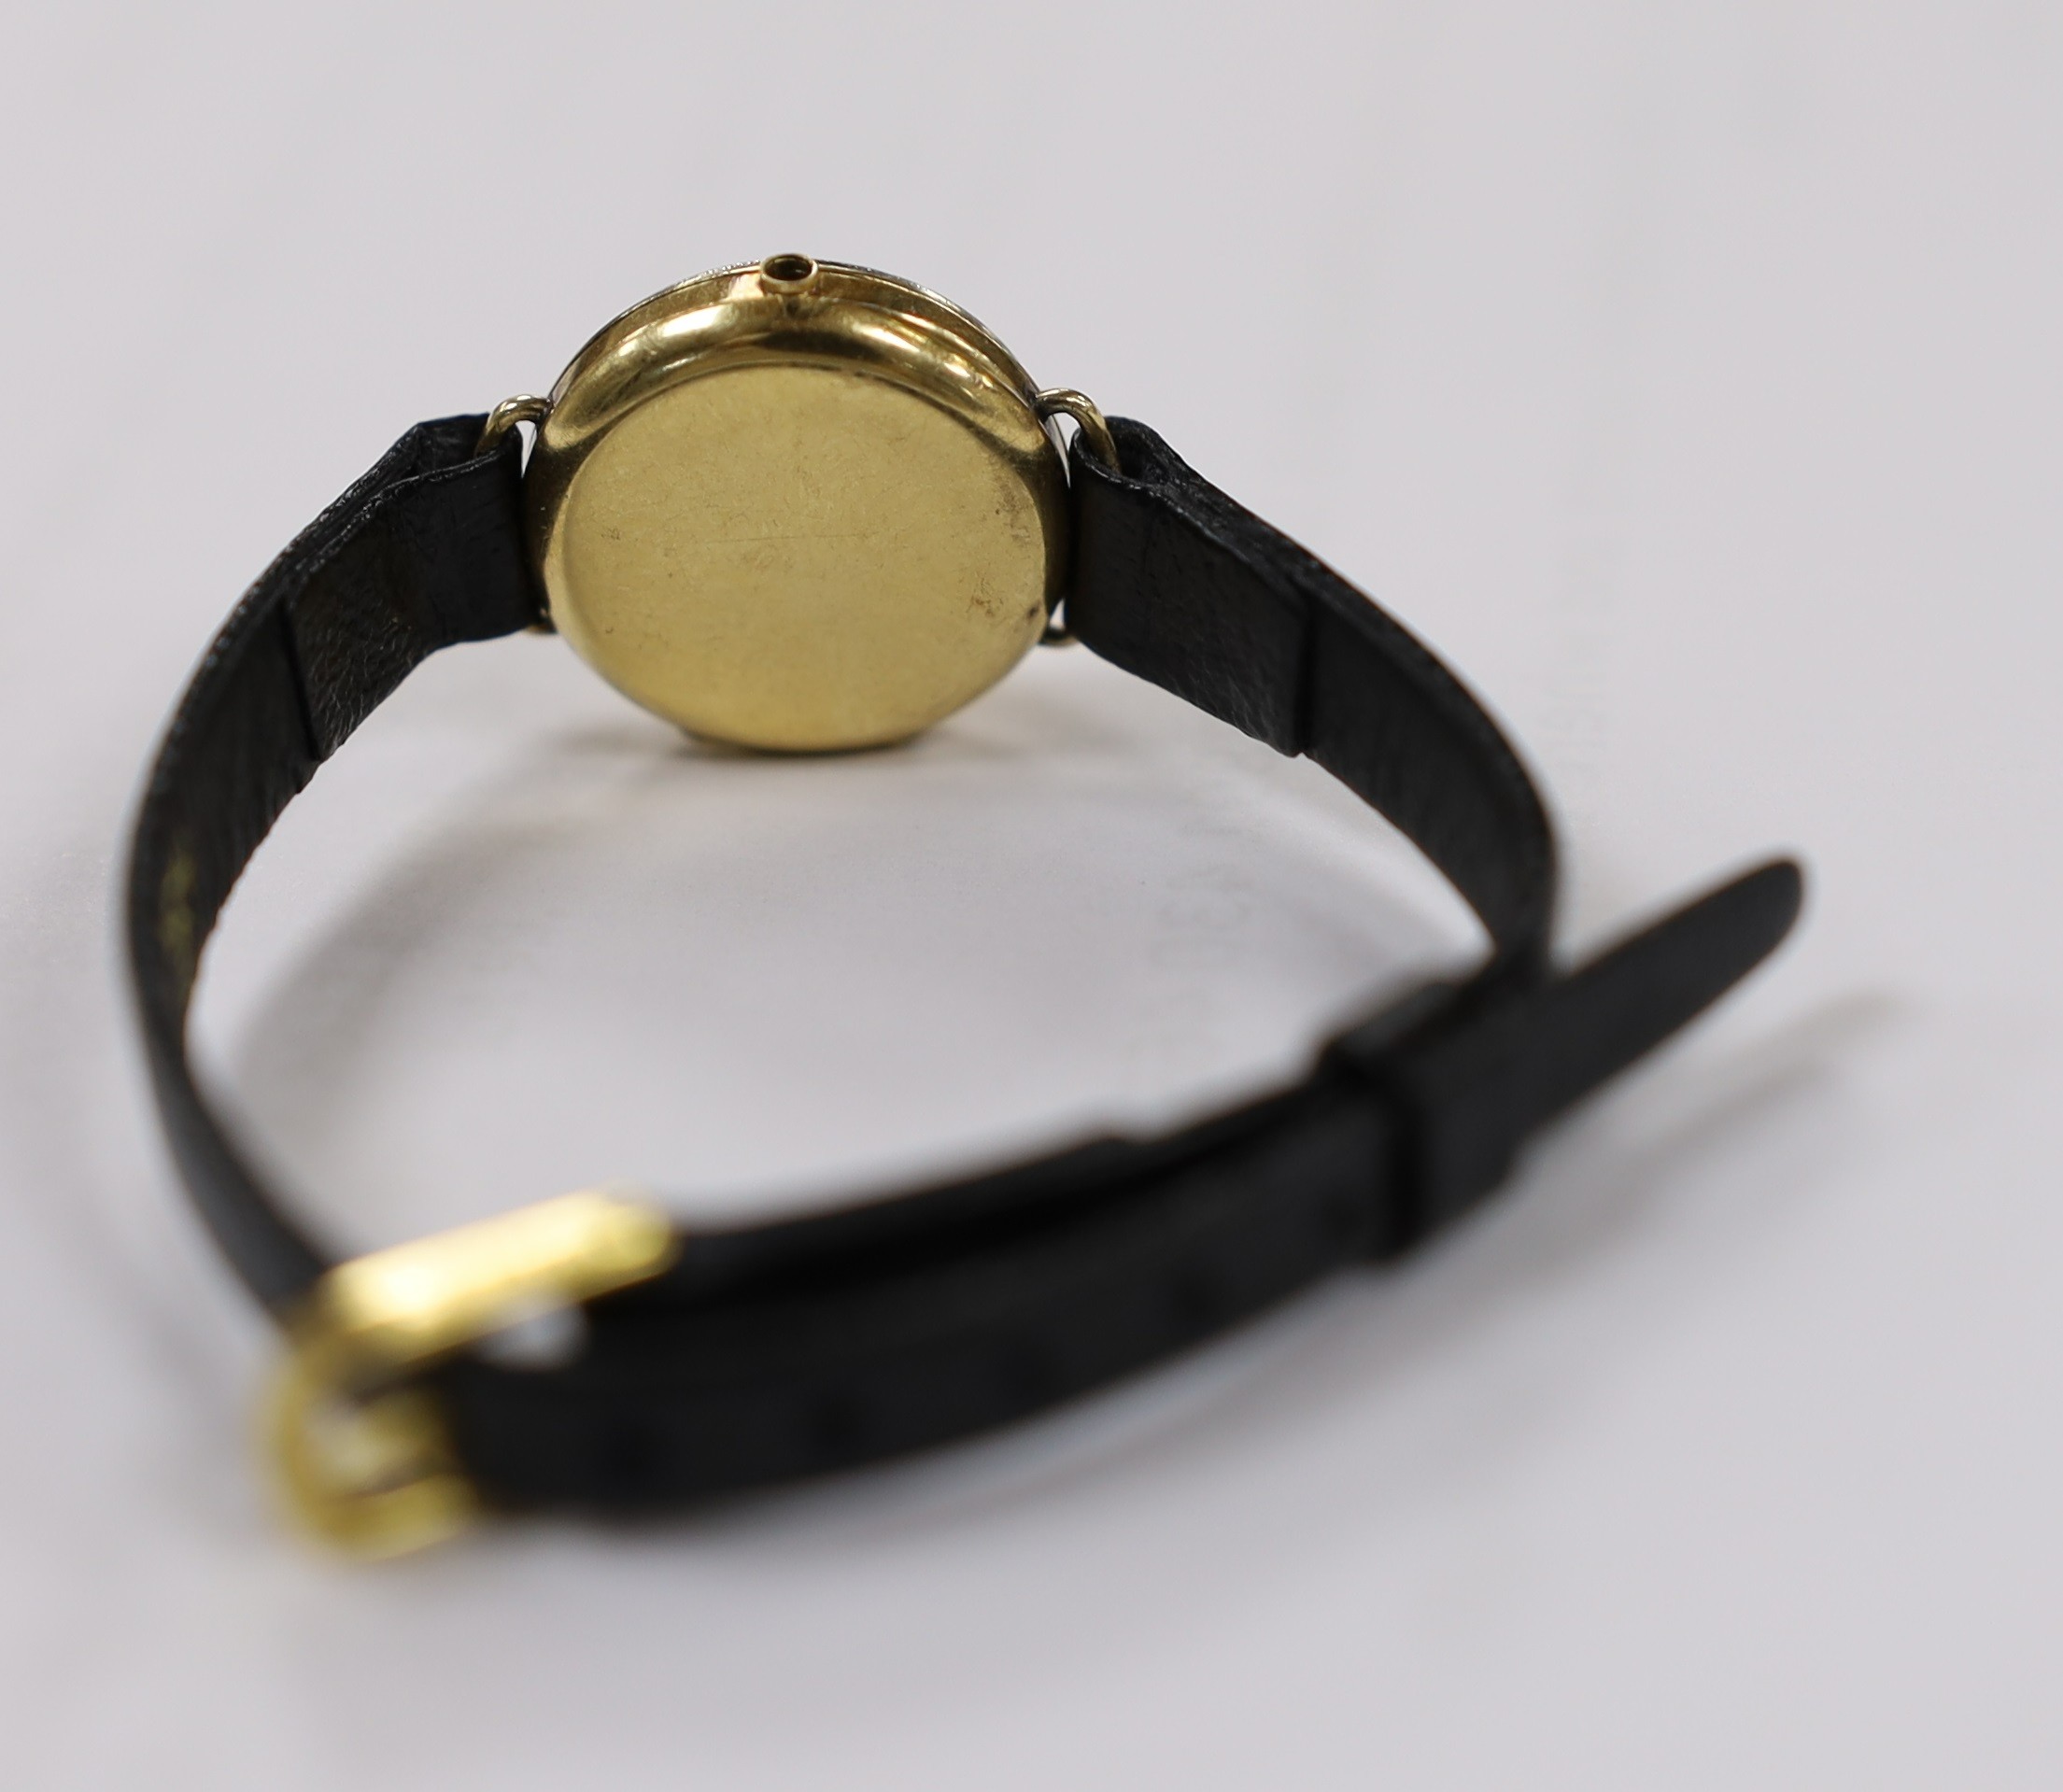 A lady's 18k manual wind wrist watch, with diamond set bezel and dial with baton numerals (a.f.), on a leather strap, lacks winding crown.